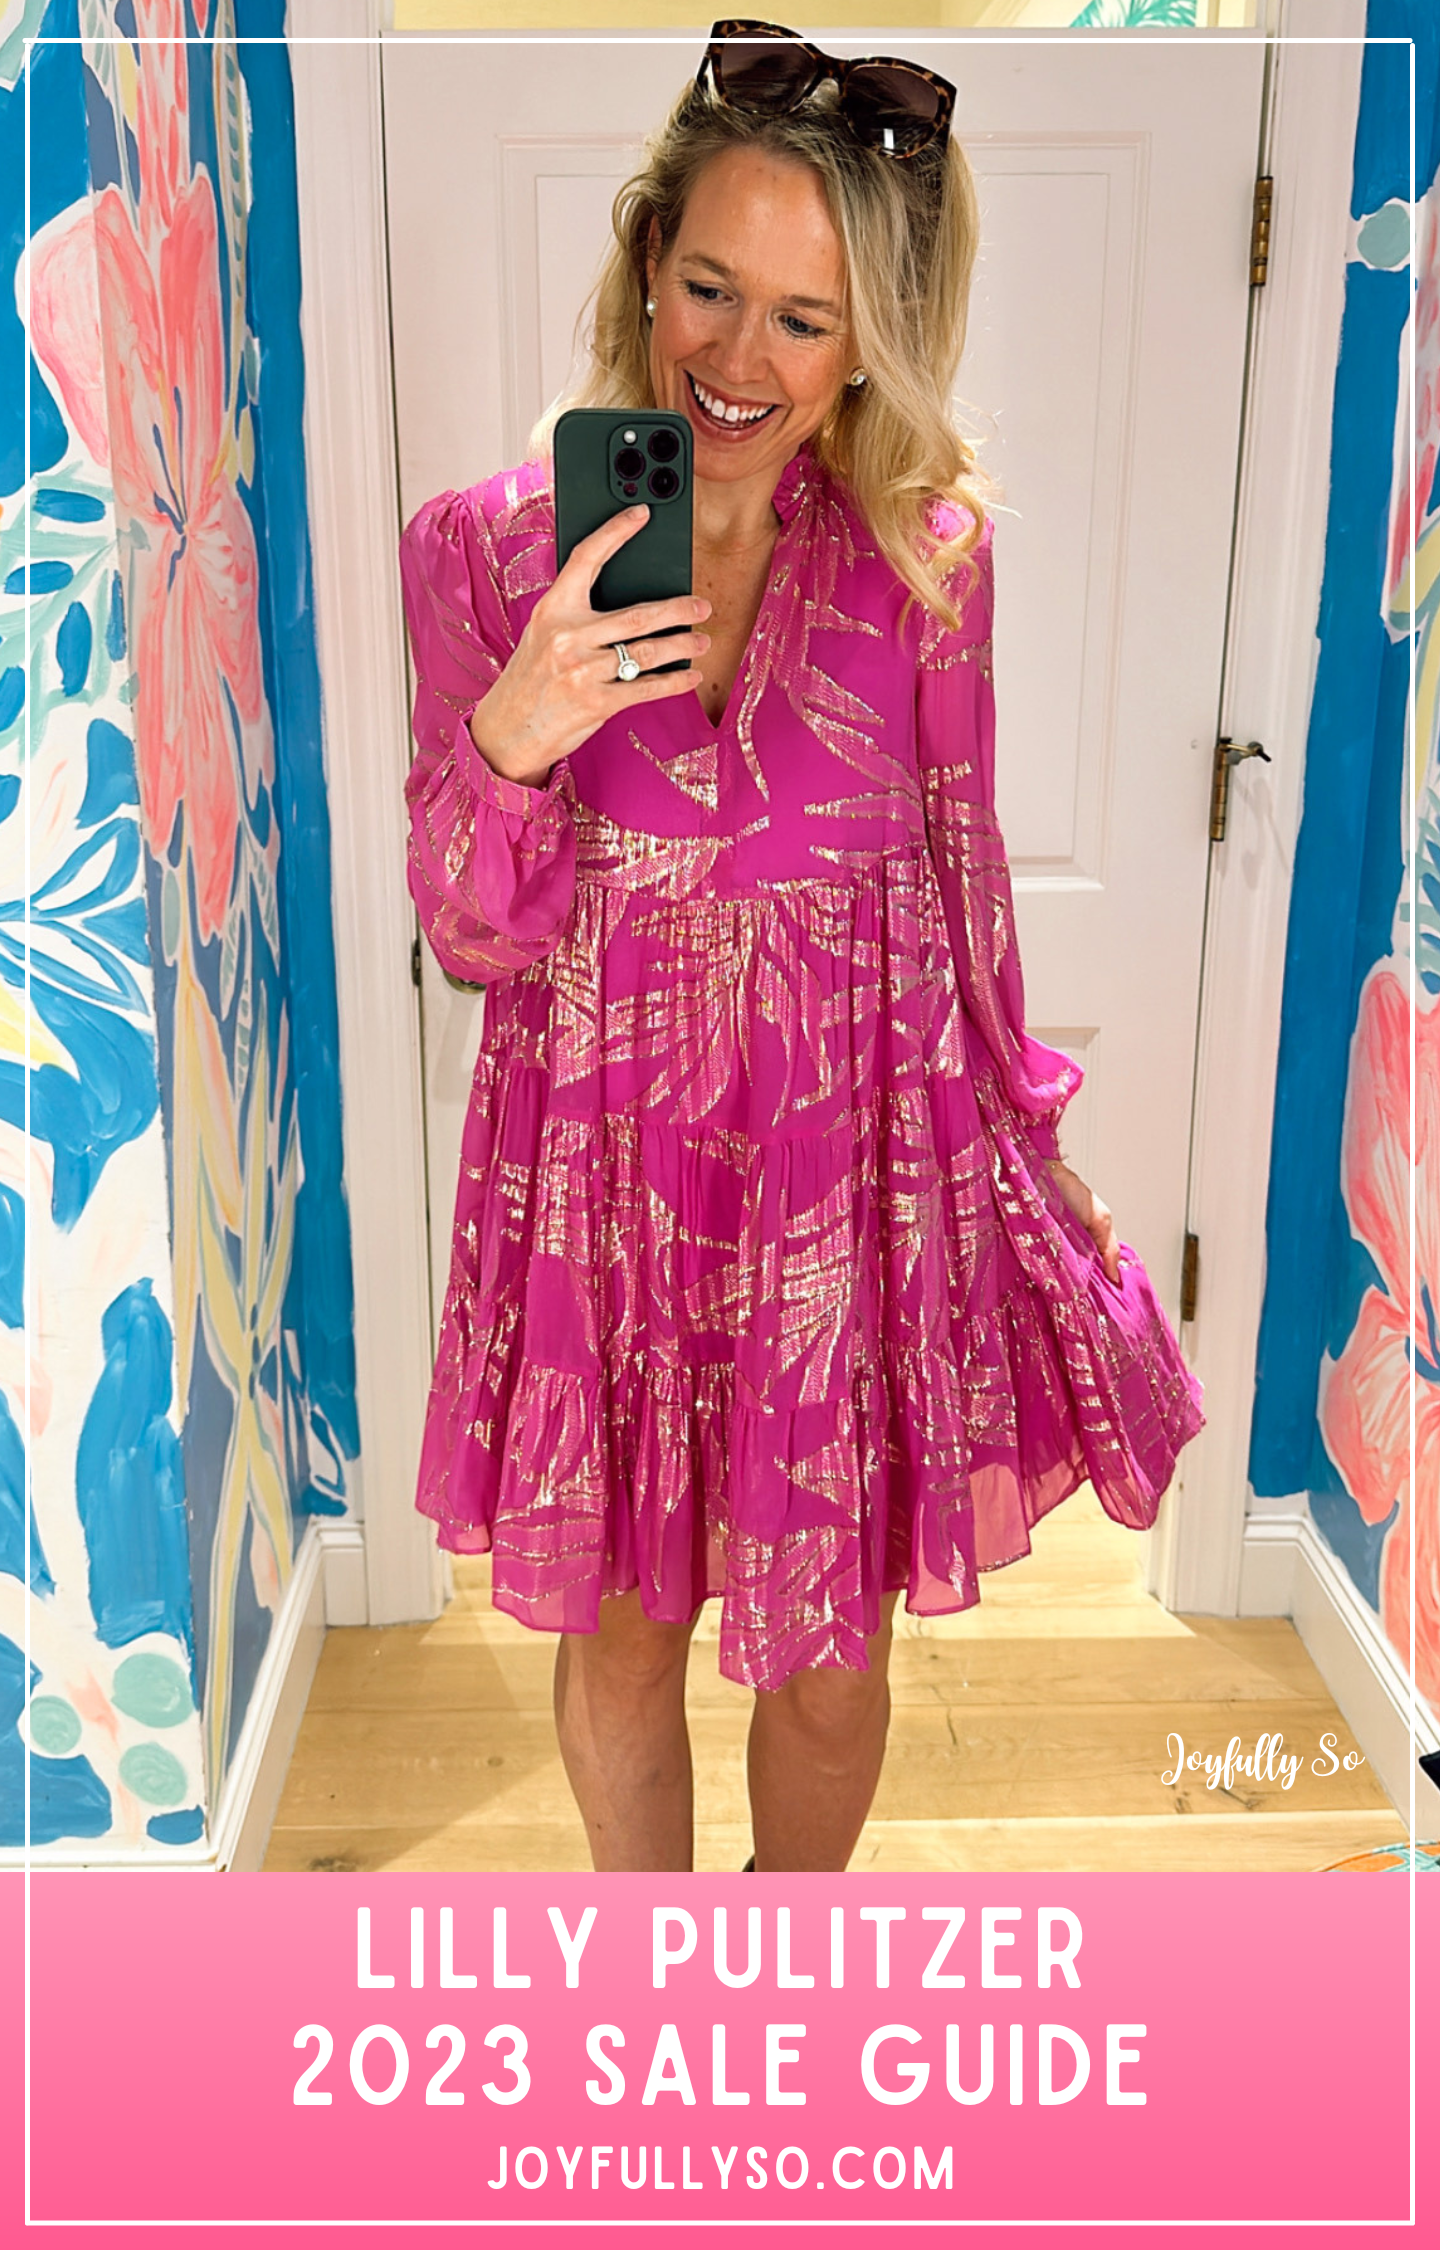 Lilly Pulitzer 2023 Sale Guide